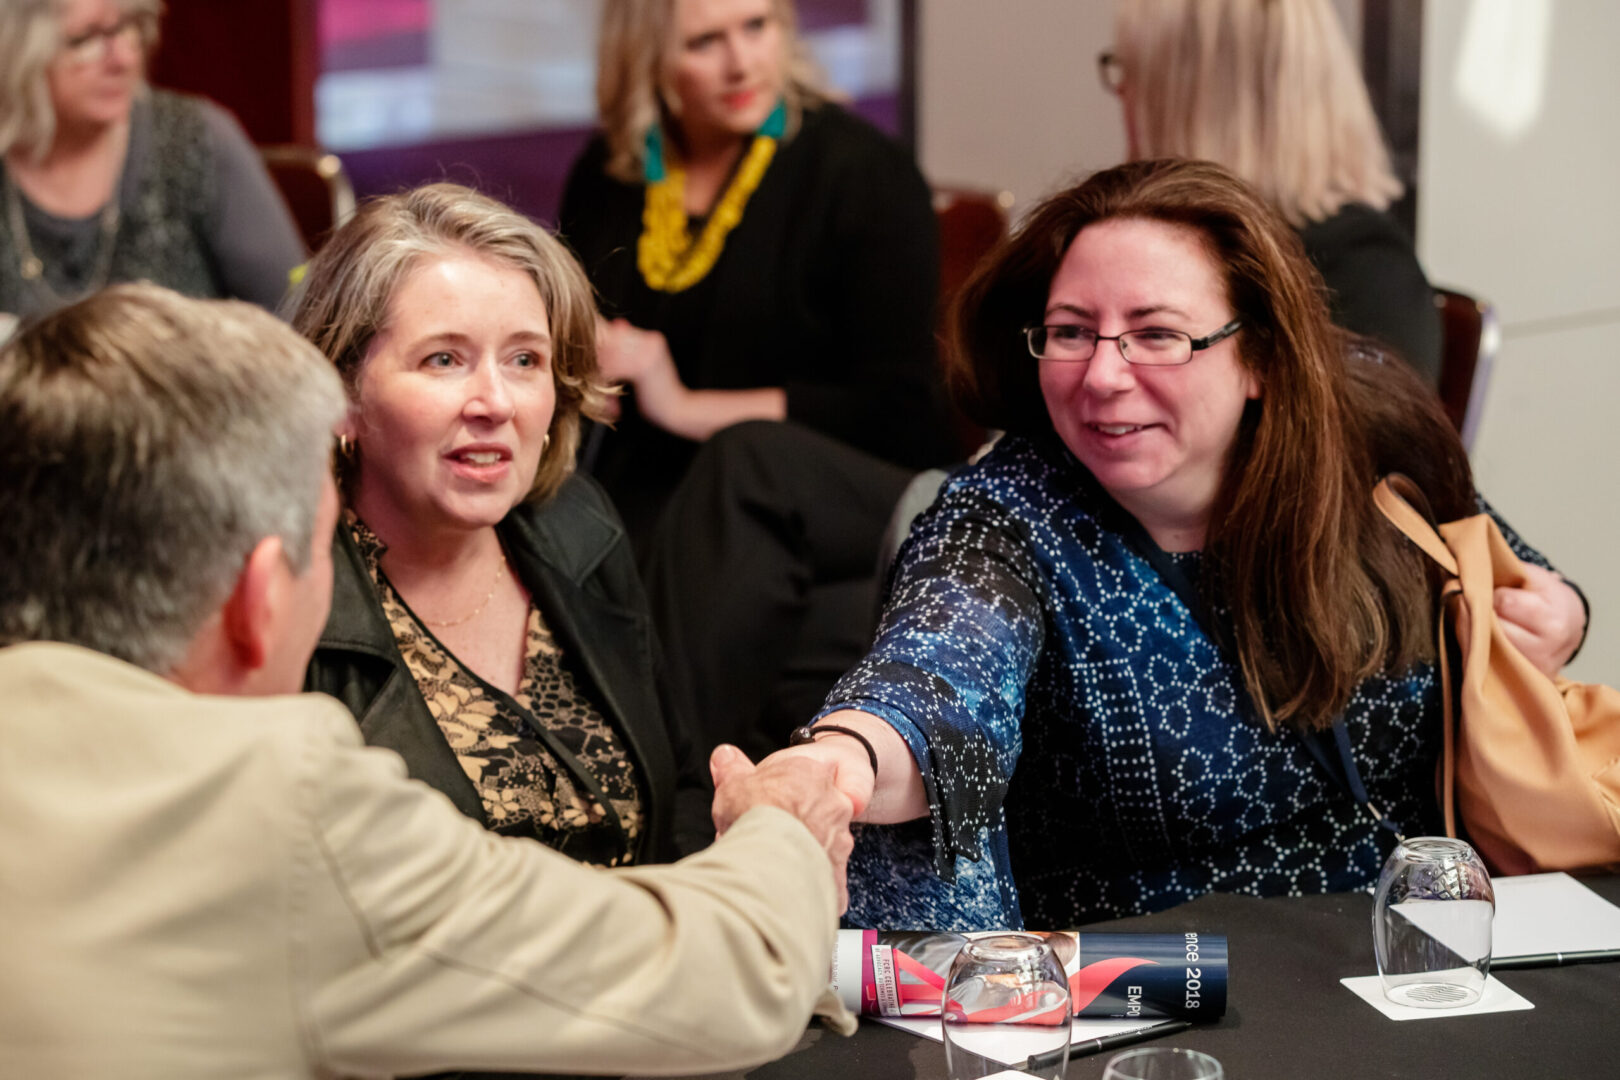 Two women shaking hands at a table with other people.